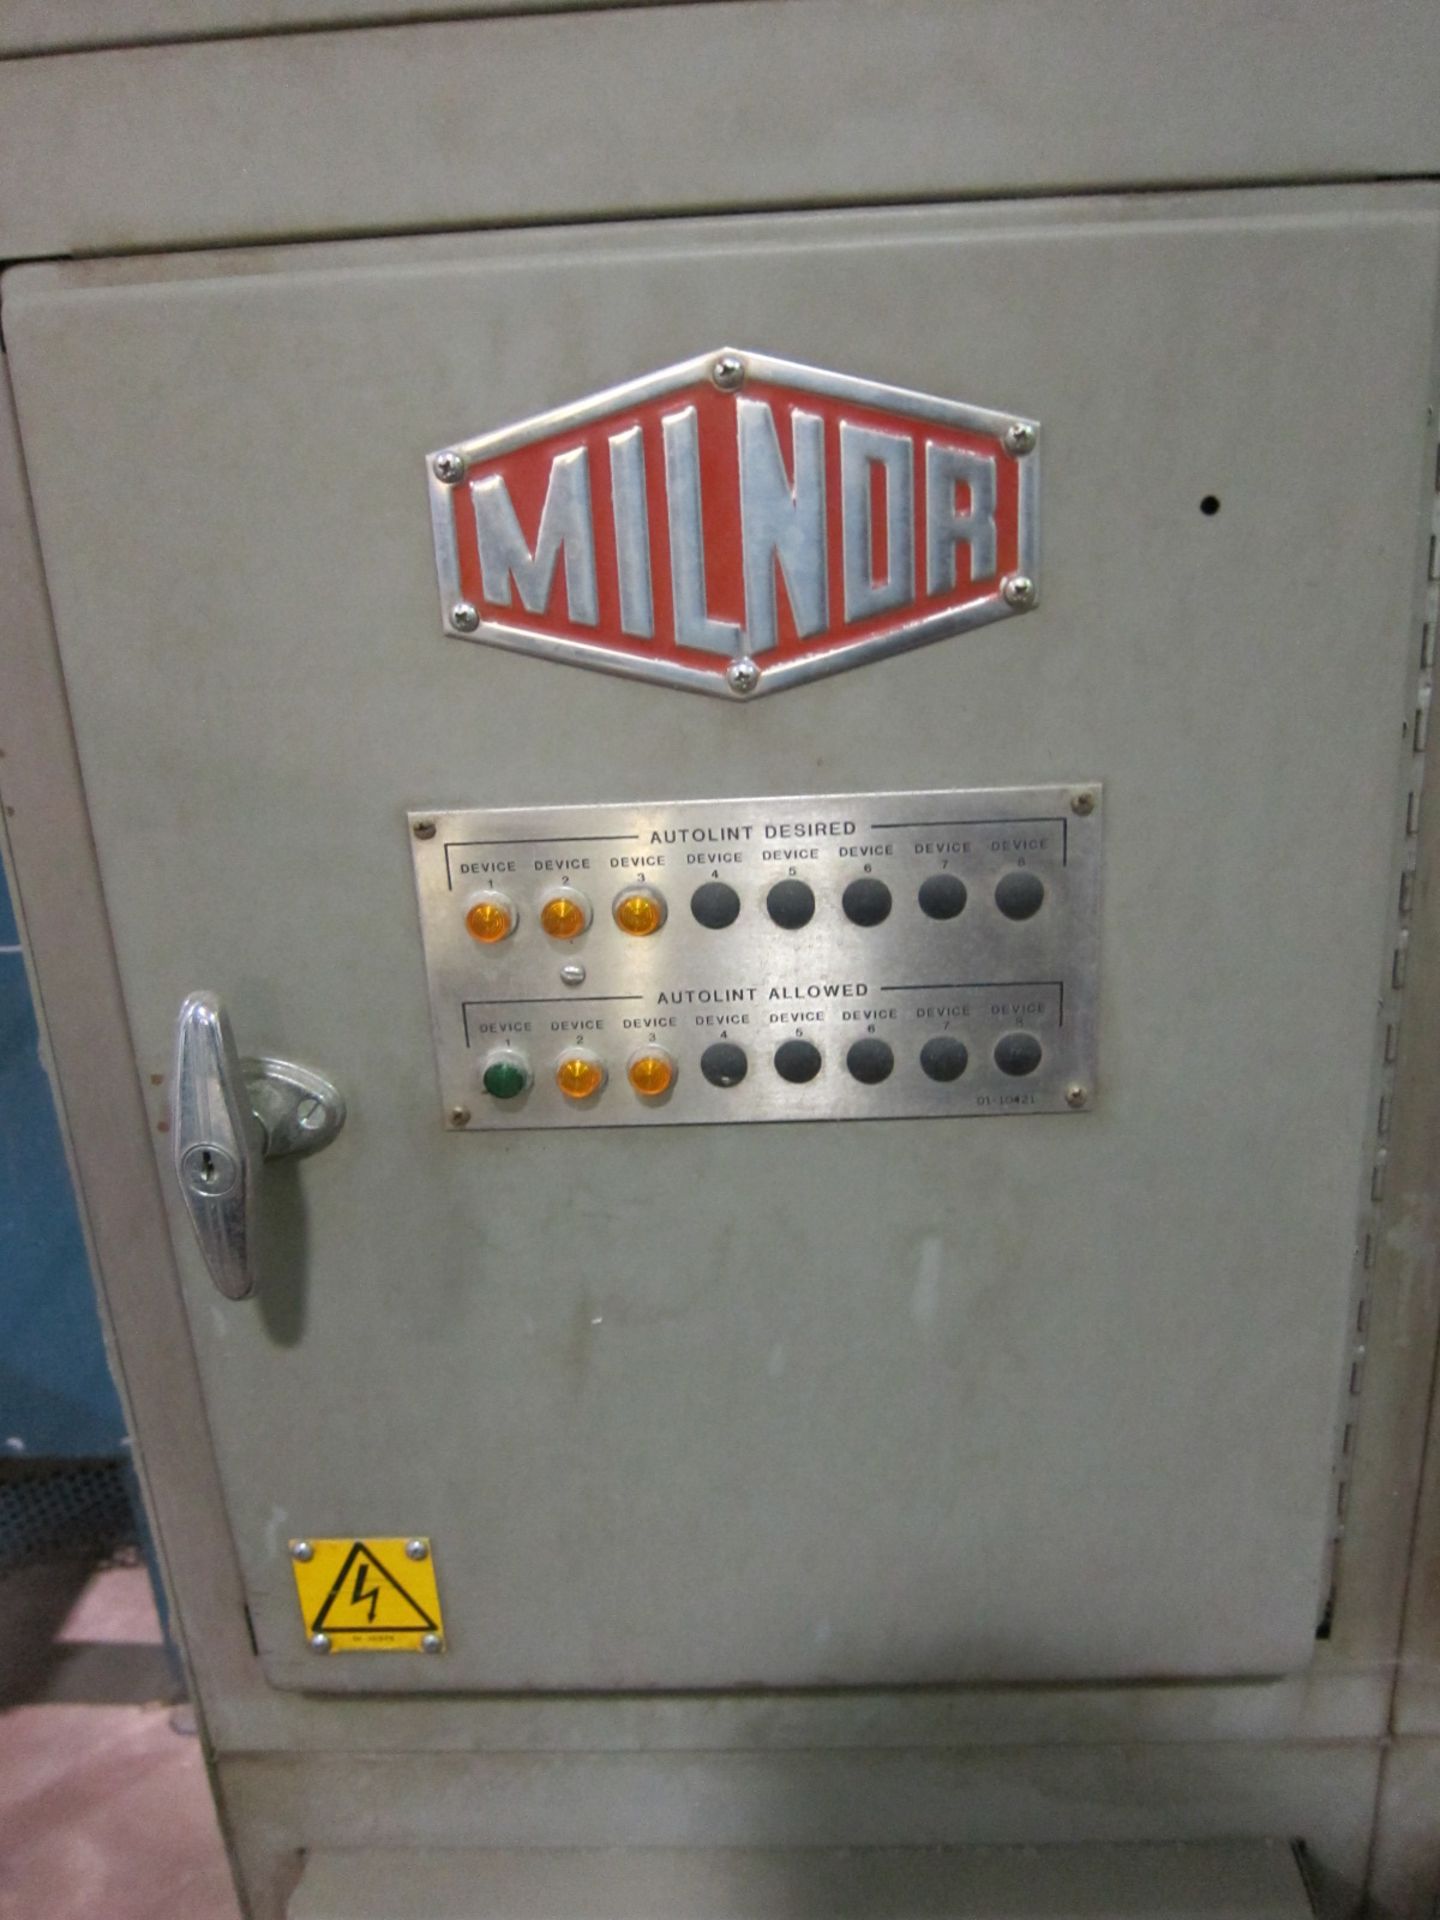 CONTROL PANEL FOR DRYERS AND SHUTTLE MILNOR - Image 6 of 9